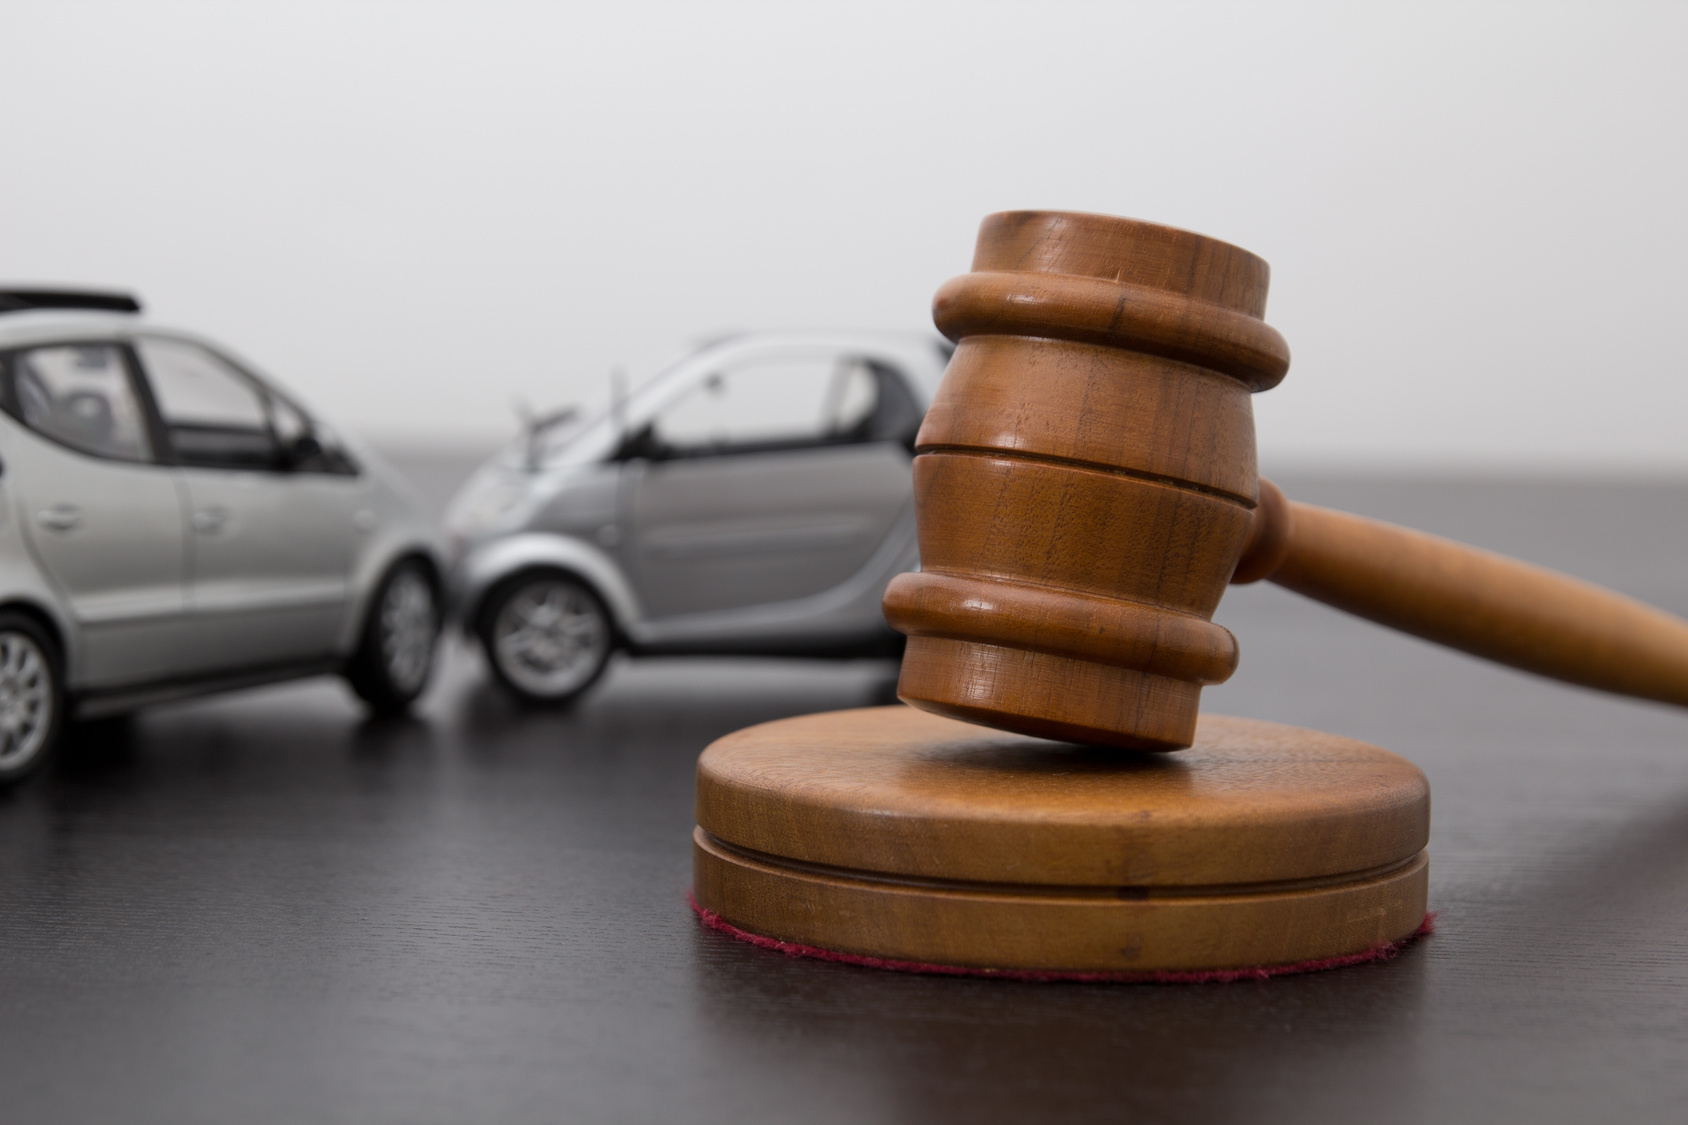  motor vehicle accident compensation   